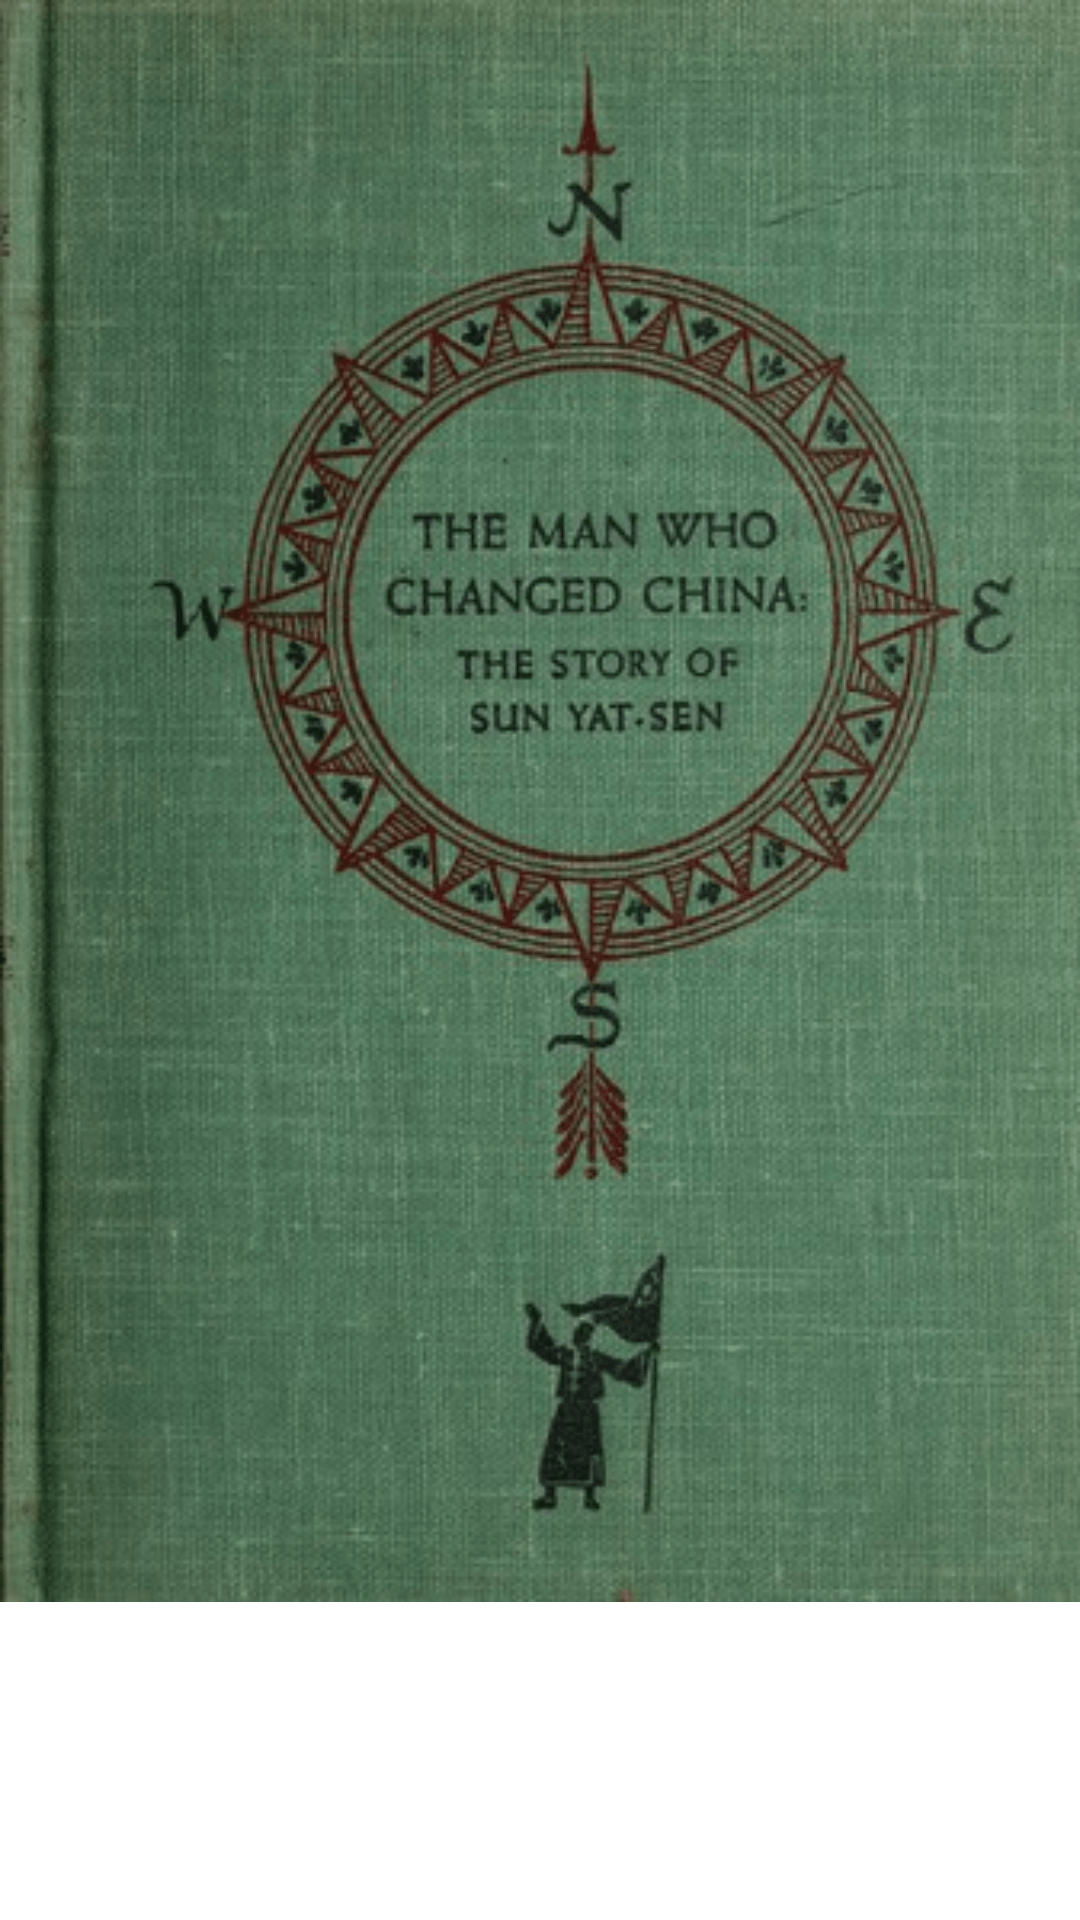 The Man who Changed China: The Story of Sun Yat-sen